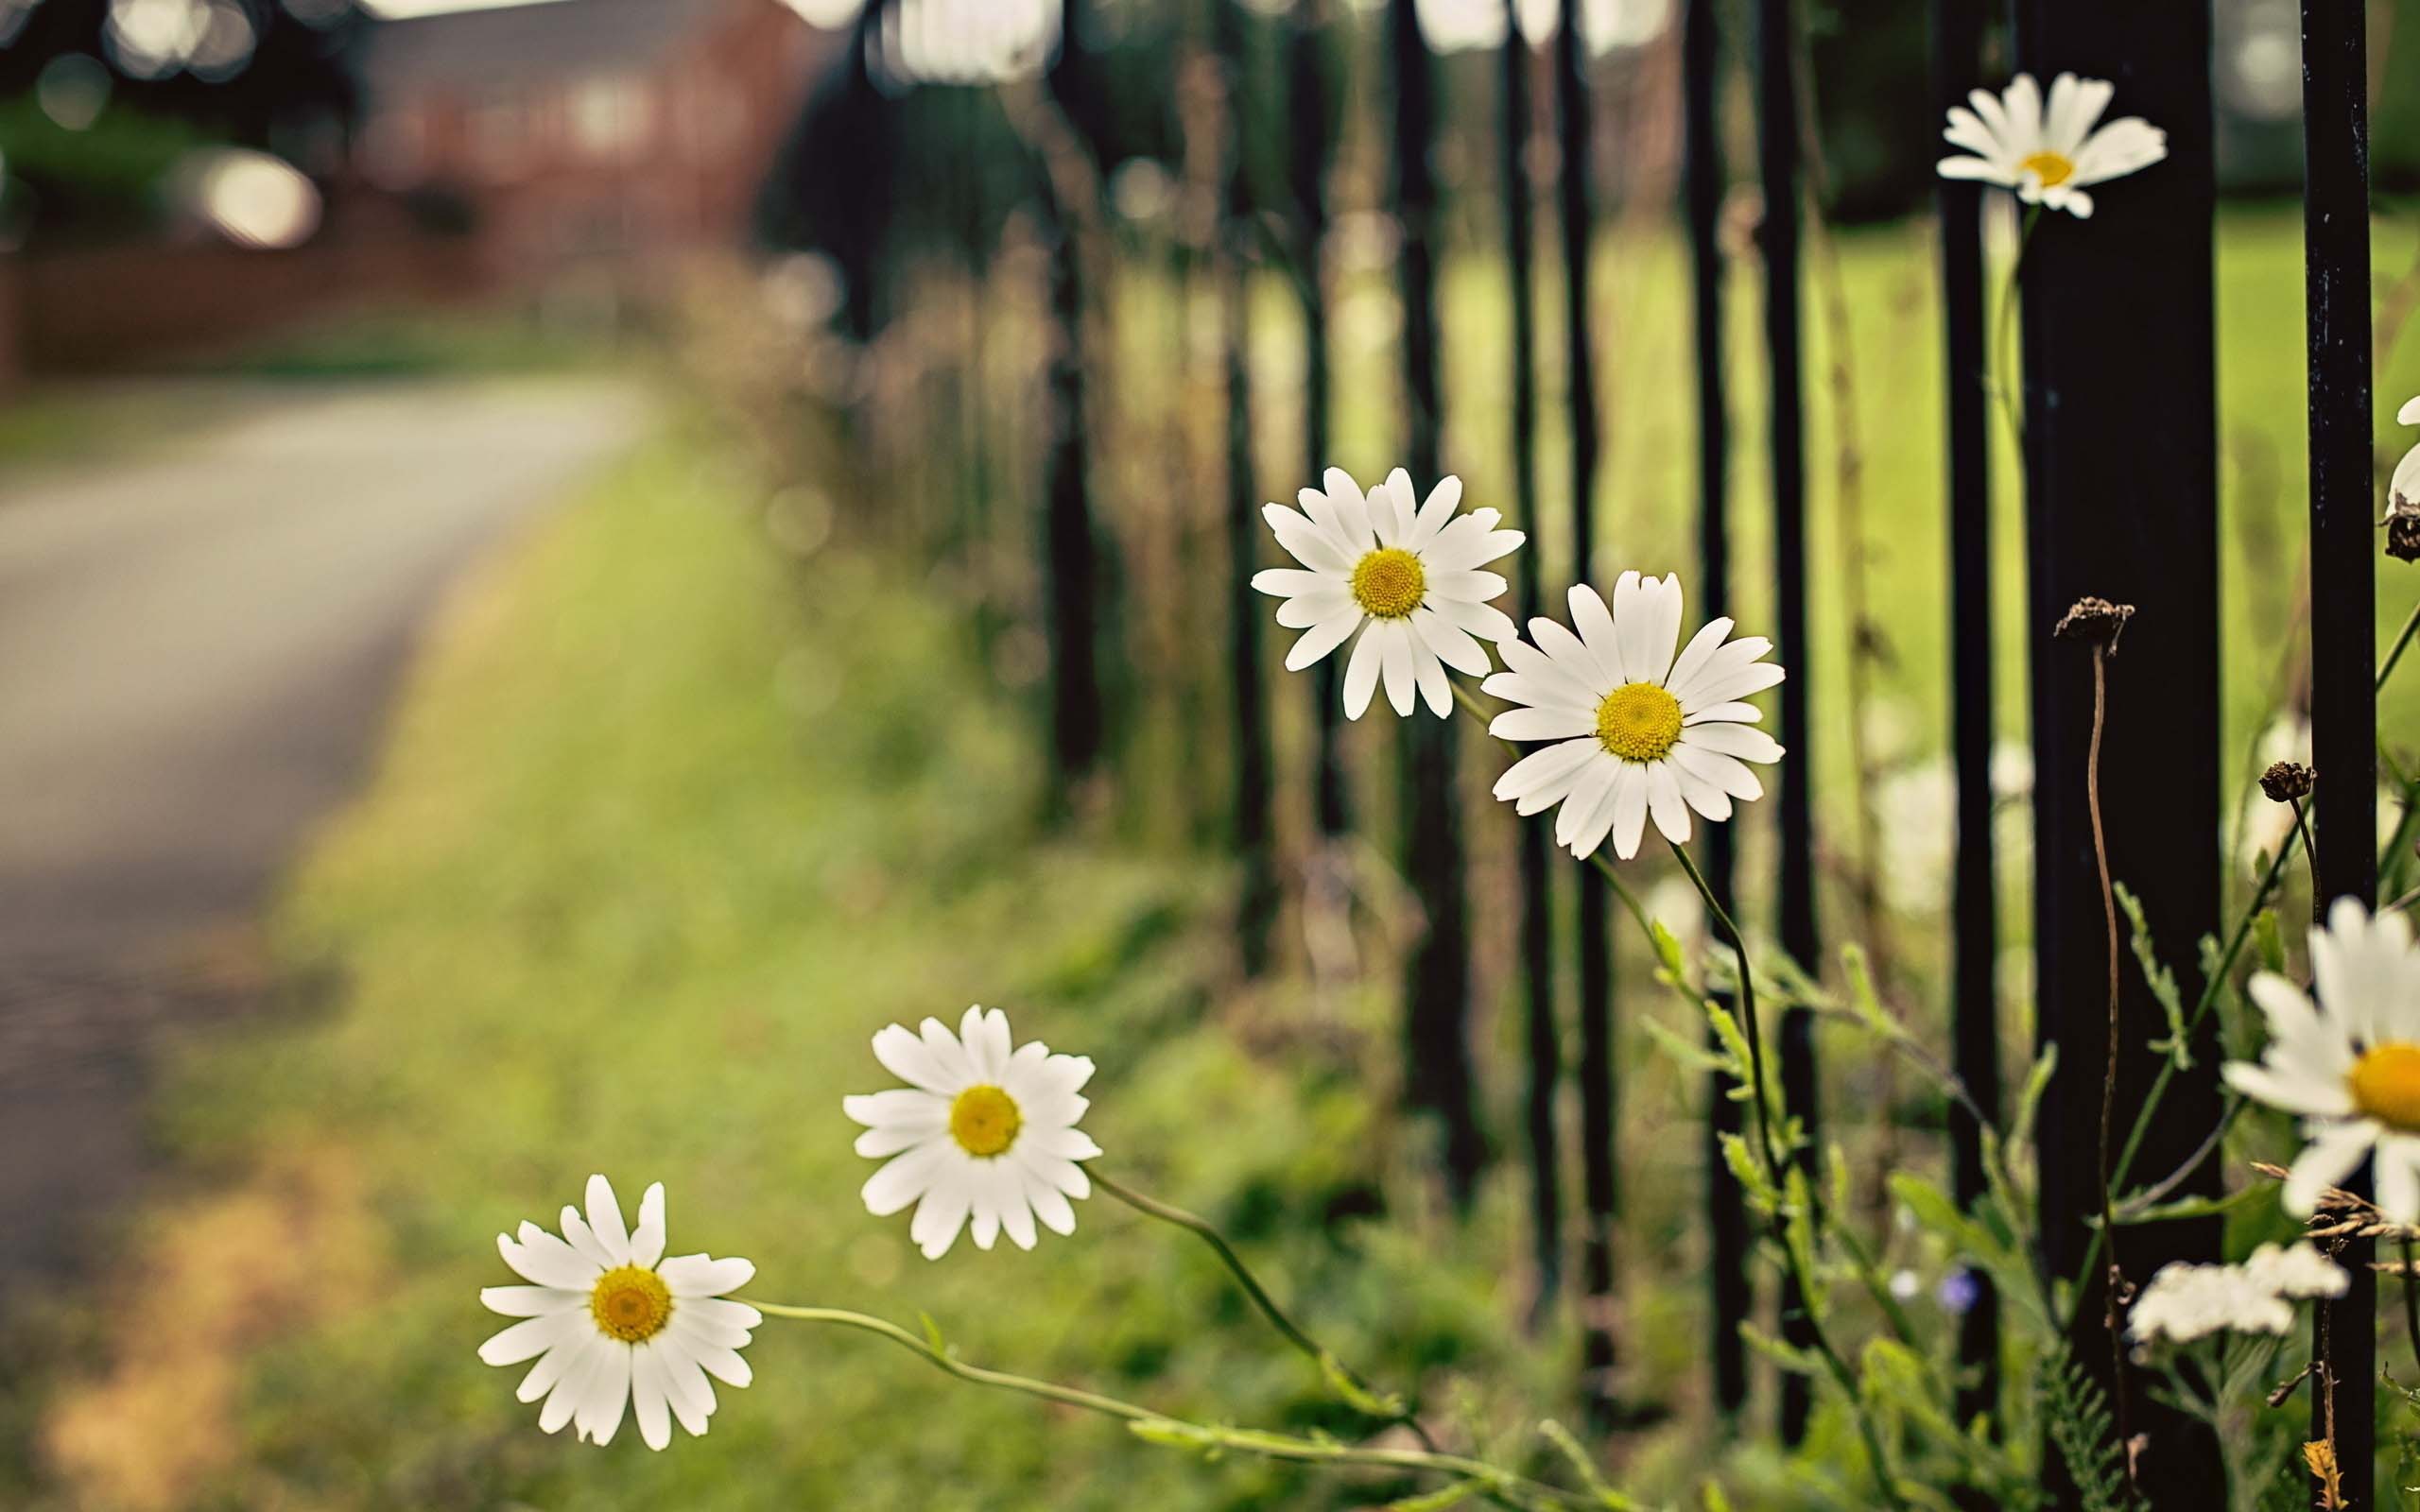 daisy next to the fence wide road side views images download